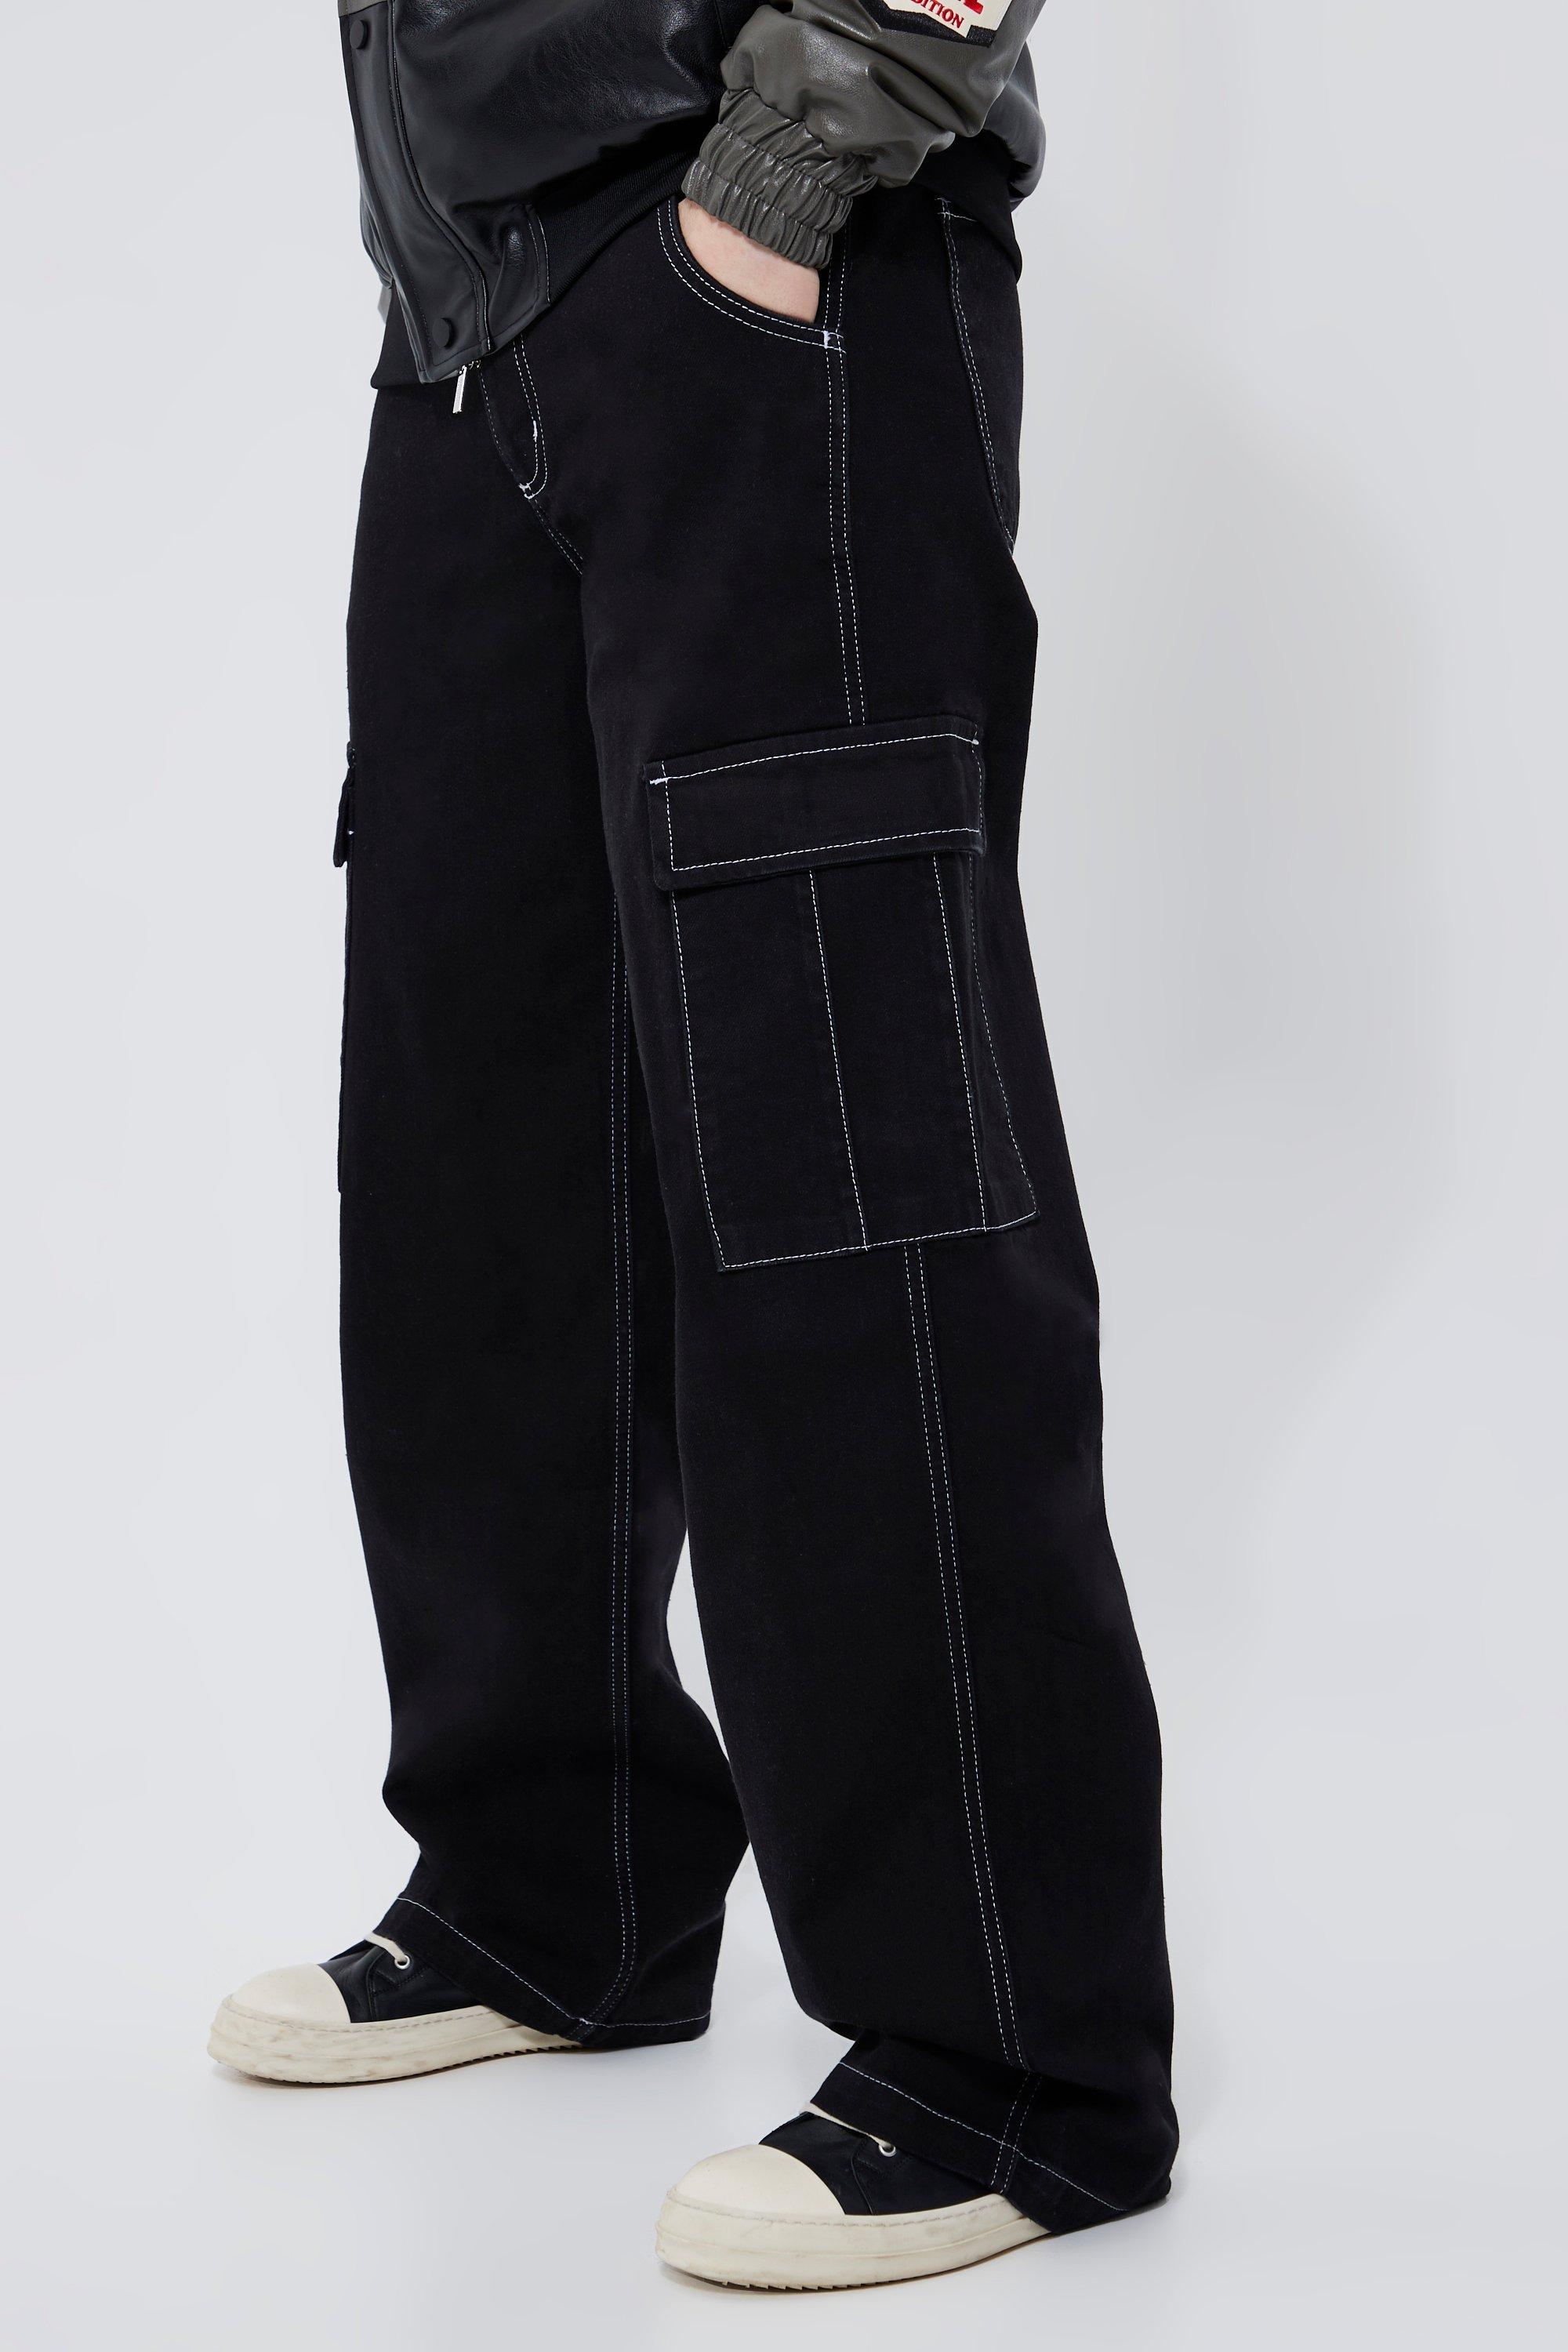 Boohoo Tall Baggy Contrast Stitch Cargo Pocket Jeans in Black | Lyst